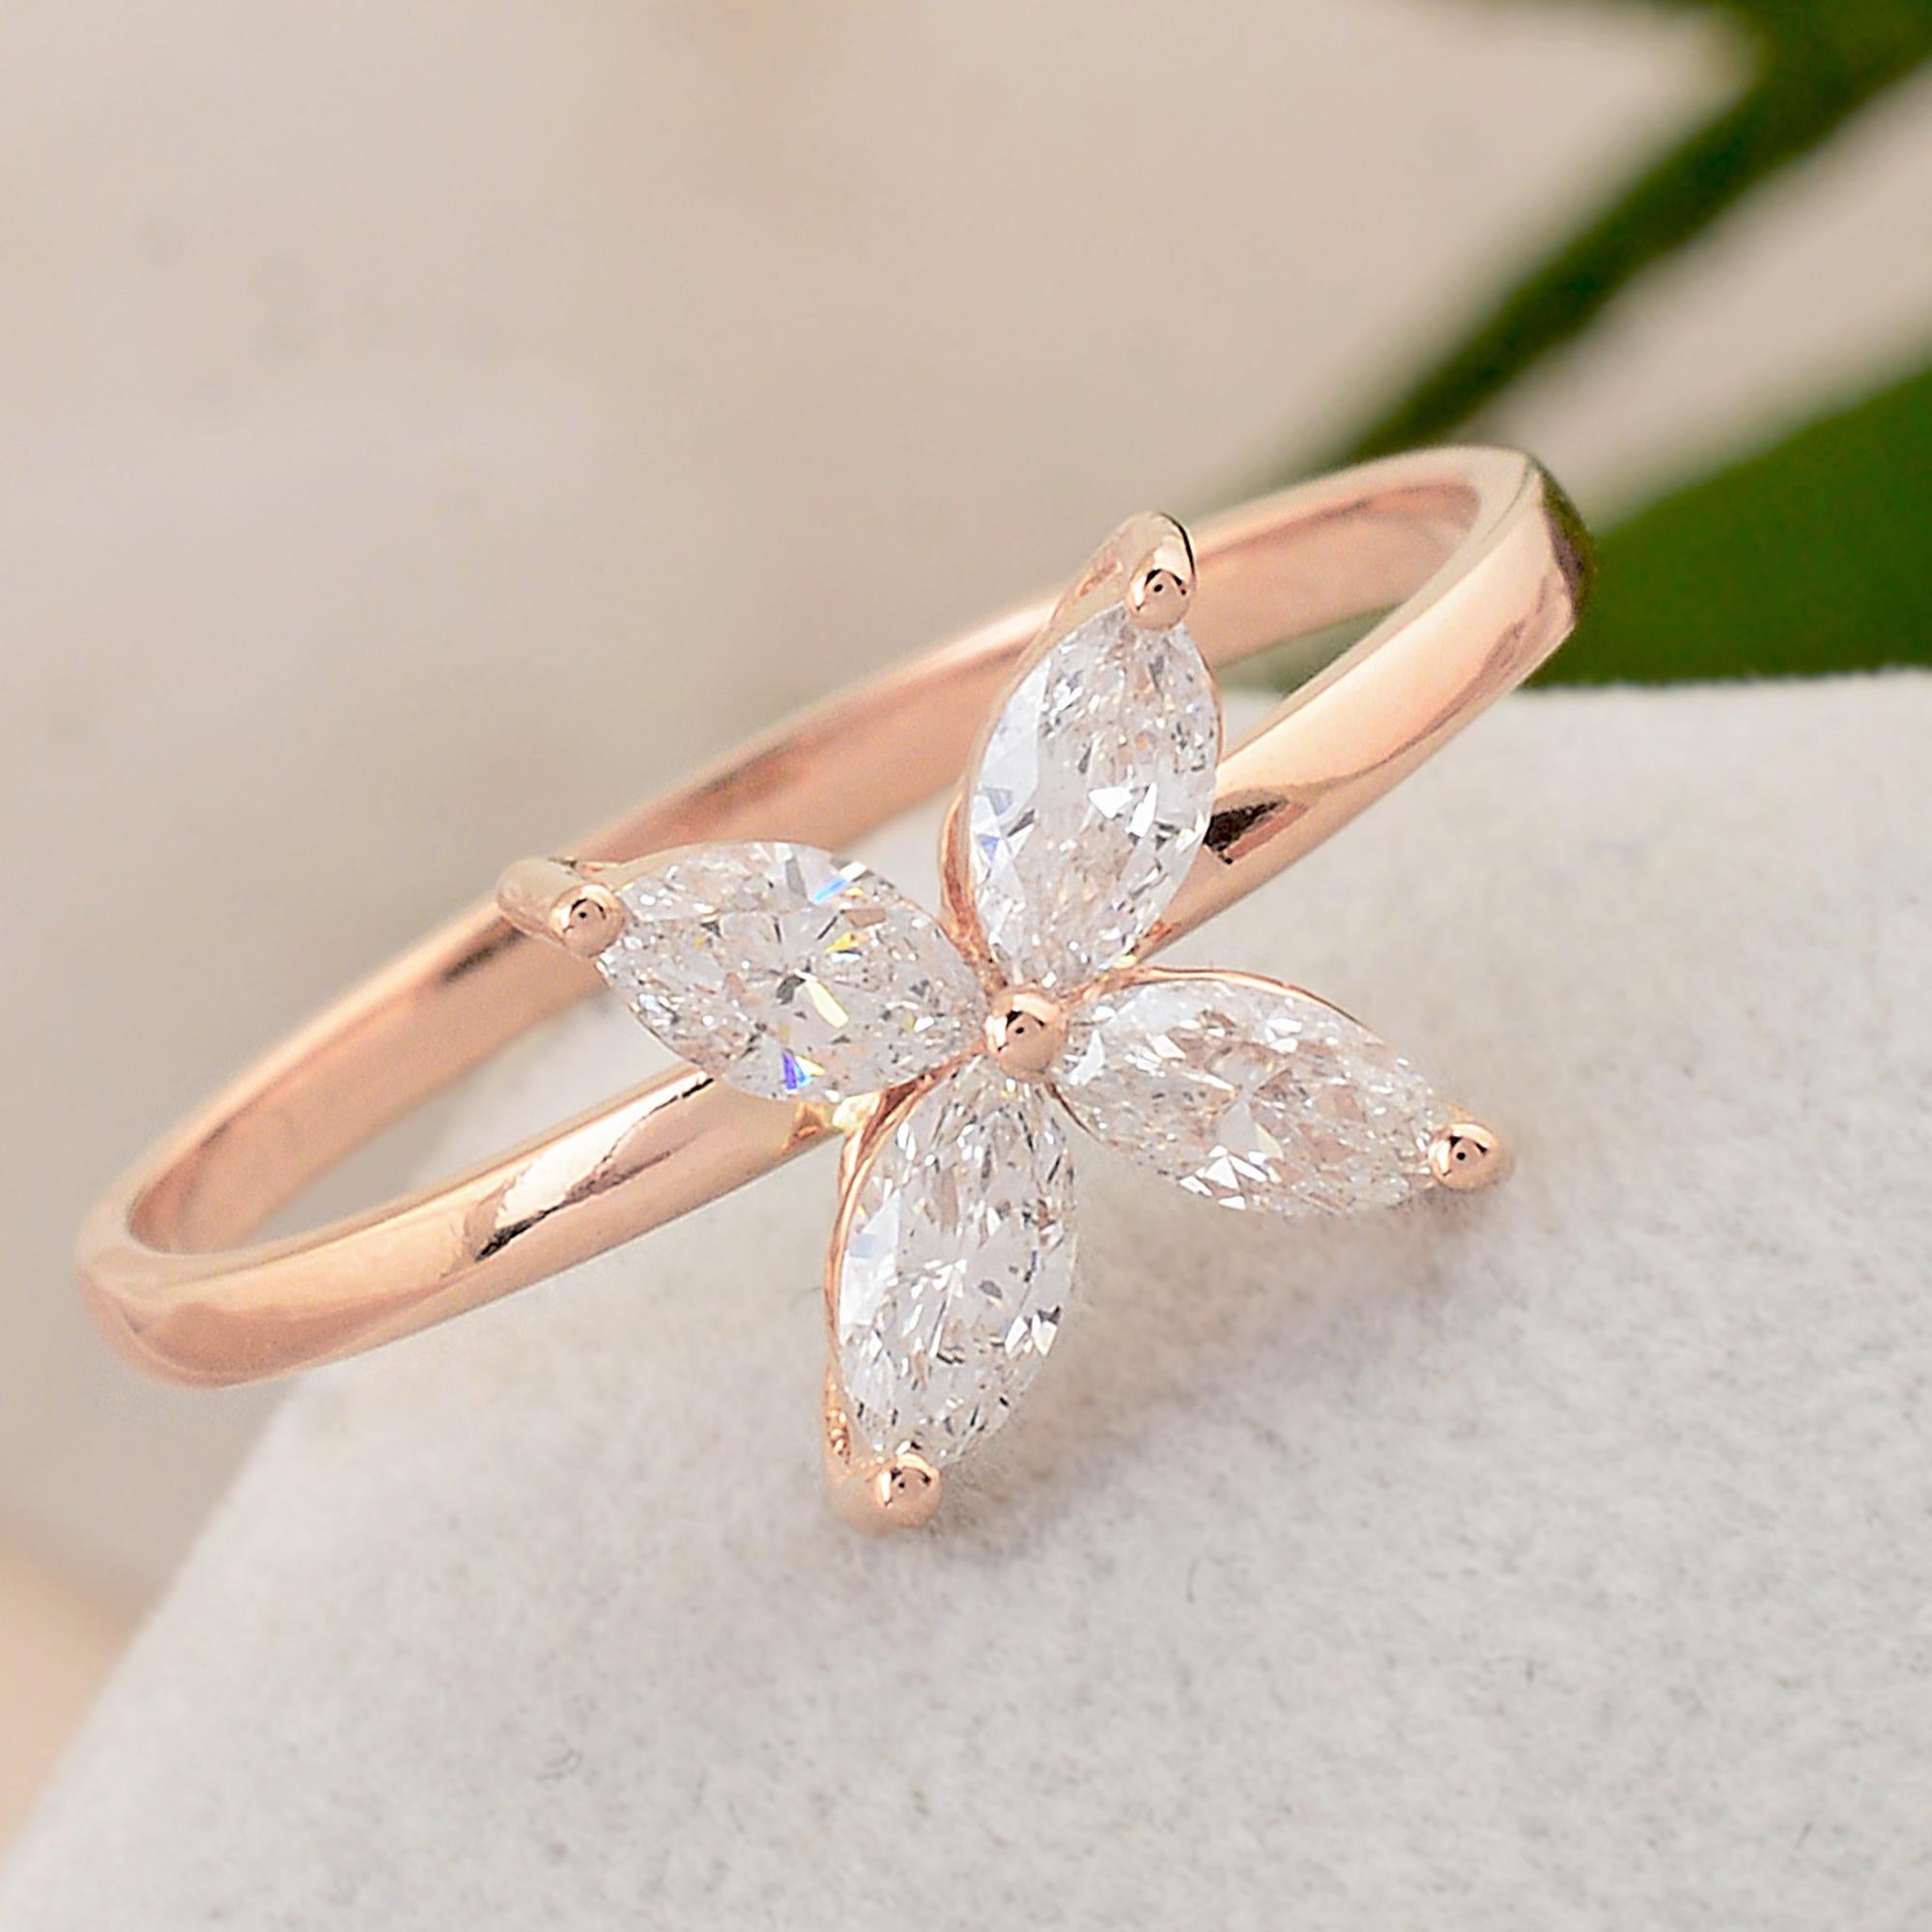 For Sale:  0.46 Carat SI Clarity HI Color Marquise Diamond Ring 18 Karat Rose Gold Jewelry 4